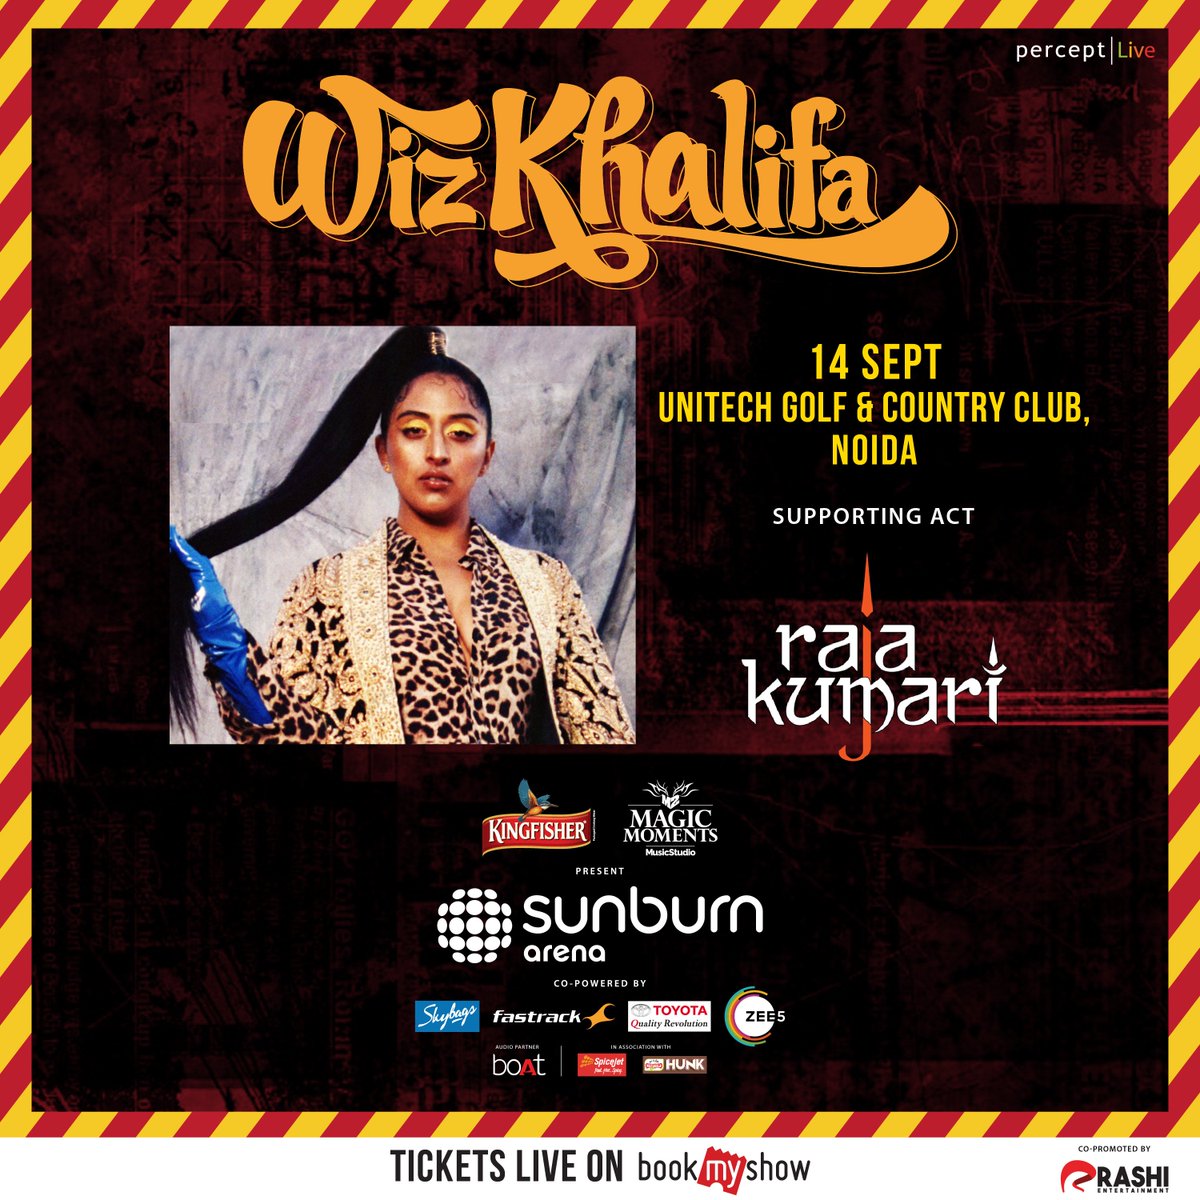 Happy to announce @TheRajaKumari on support for @SunburnFestival Arena with @Wizkhalifa on 14th Sept at Unitech Golf And Country Club, Noida. Grab your tickets - bit.ly/SunburnArenaWi…